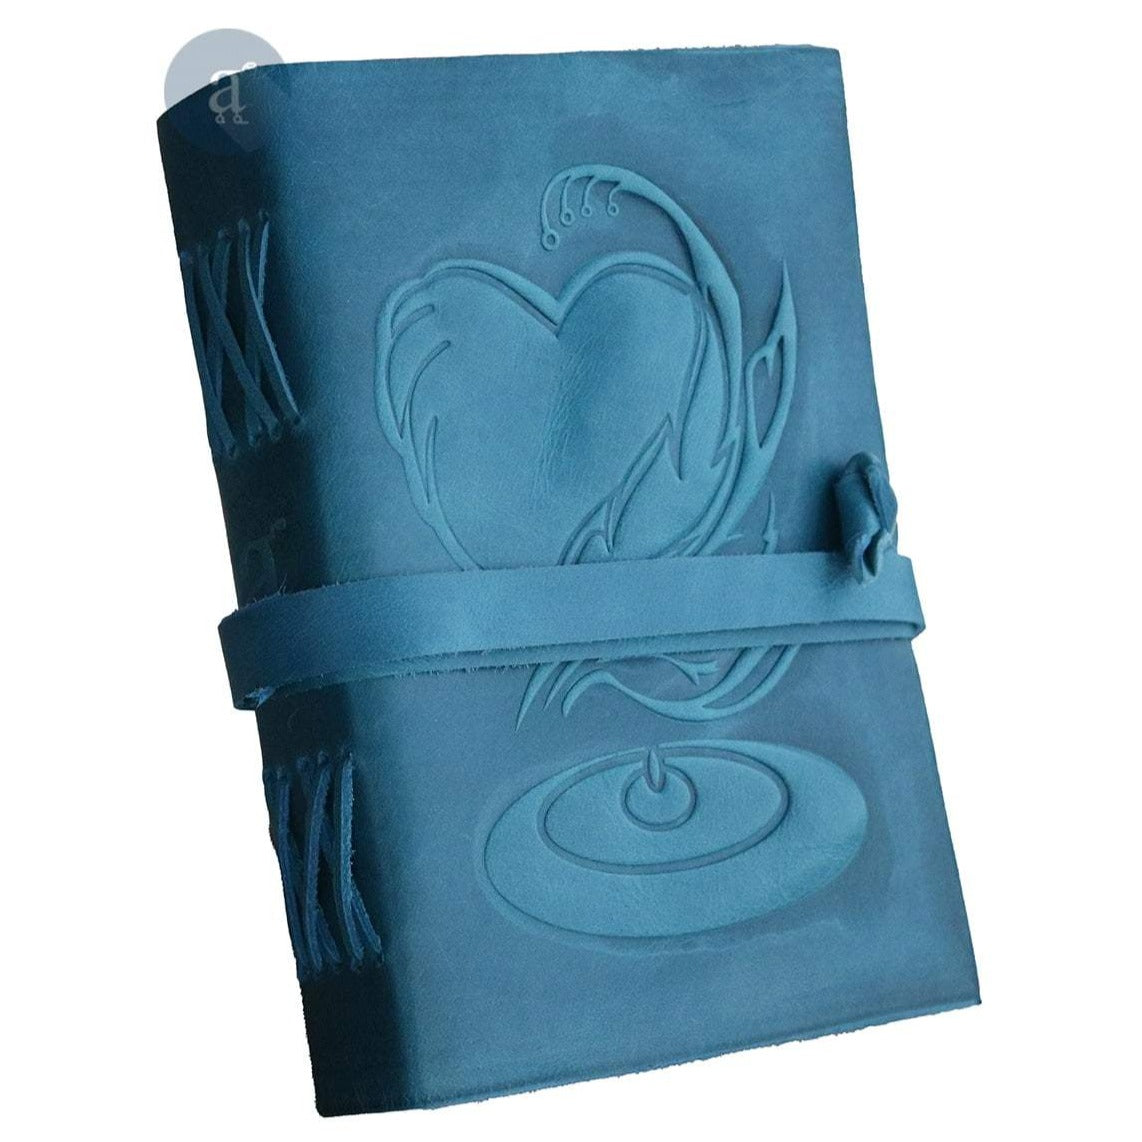 Blue Color Soft Leather Journal Closure Thread